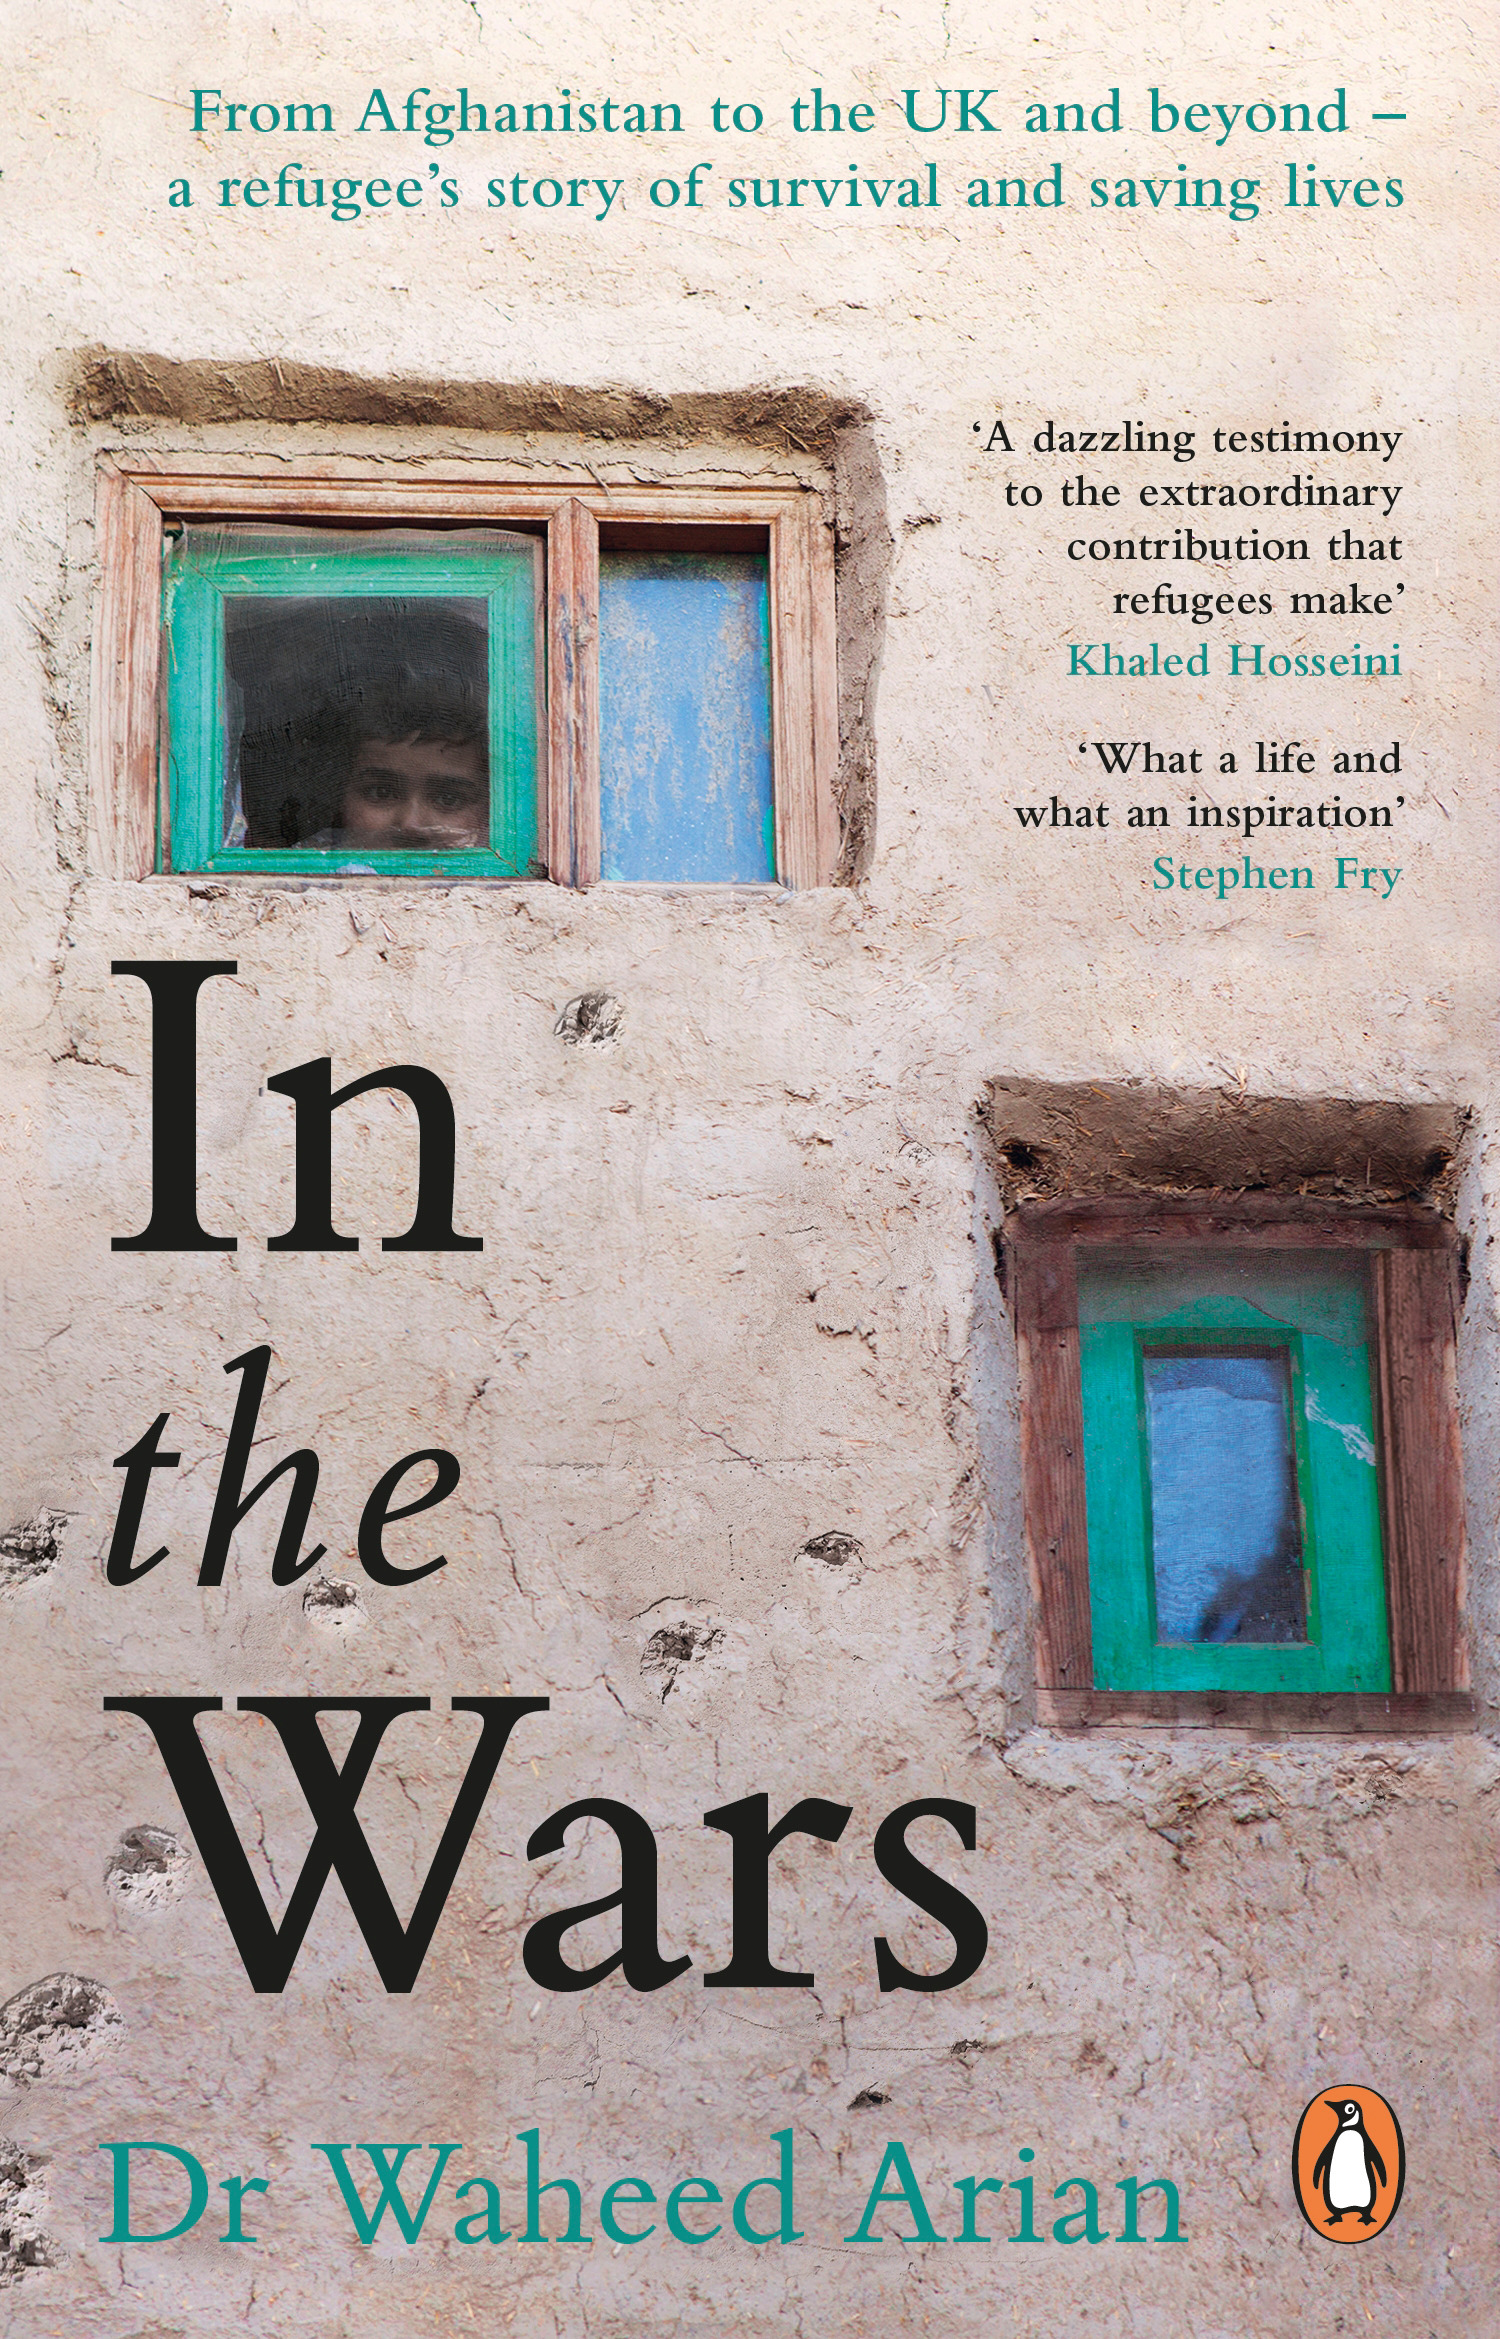 In the Wars : From Afghanistan to the UK, a story of conflict, survival and saving lives | Biography & Memoir